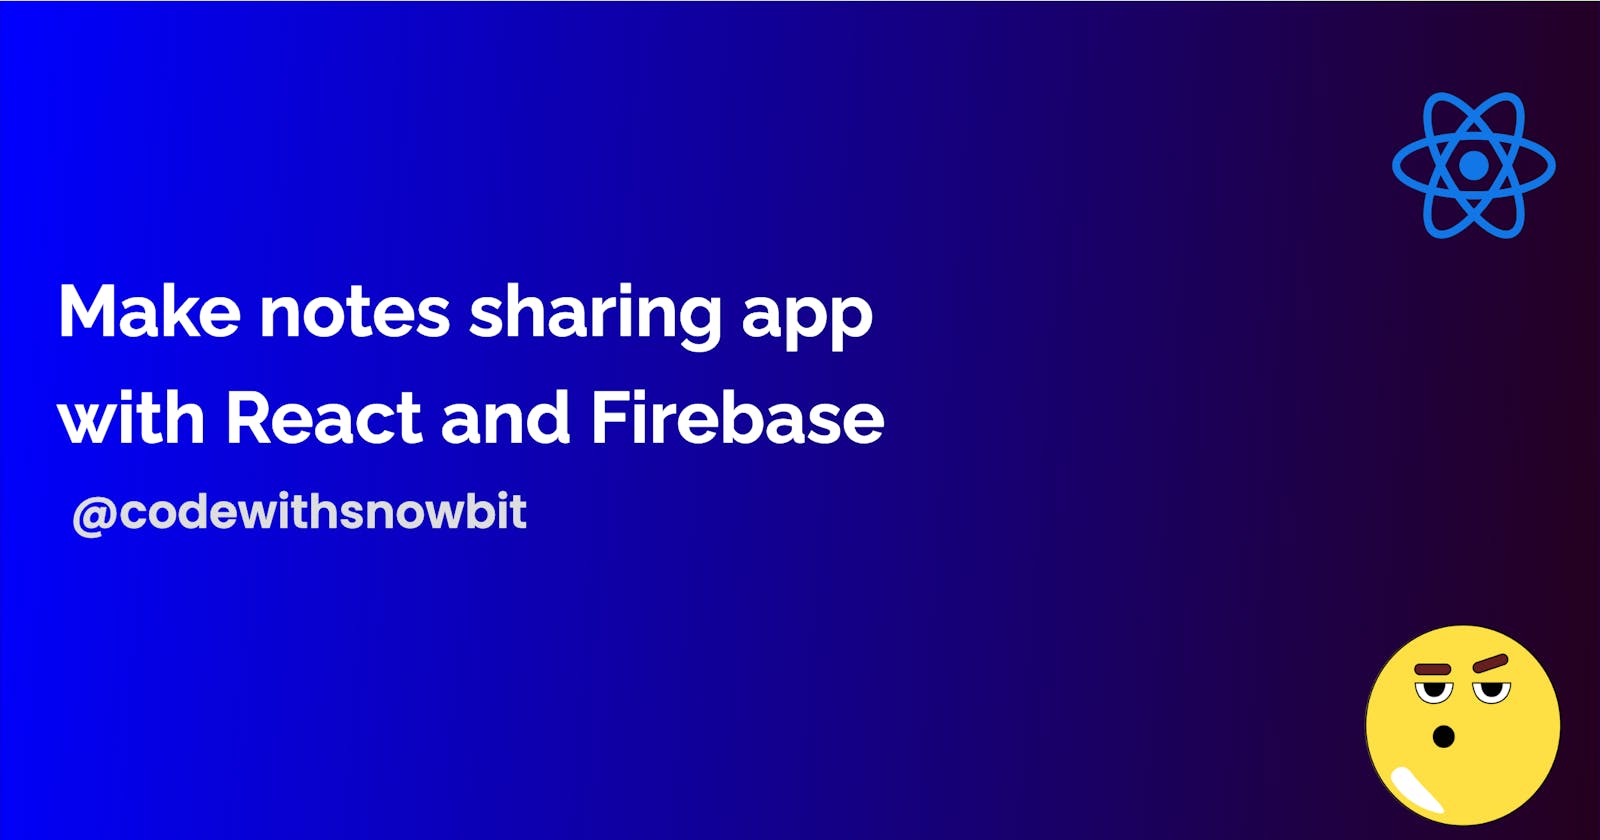 Make notes sharing app with React and Firebase